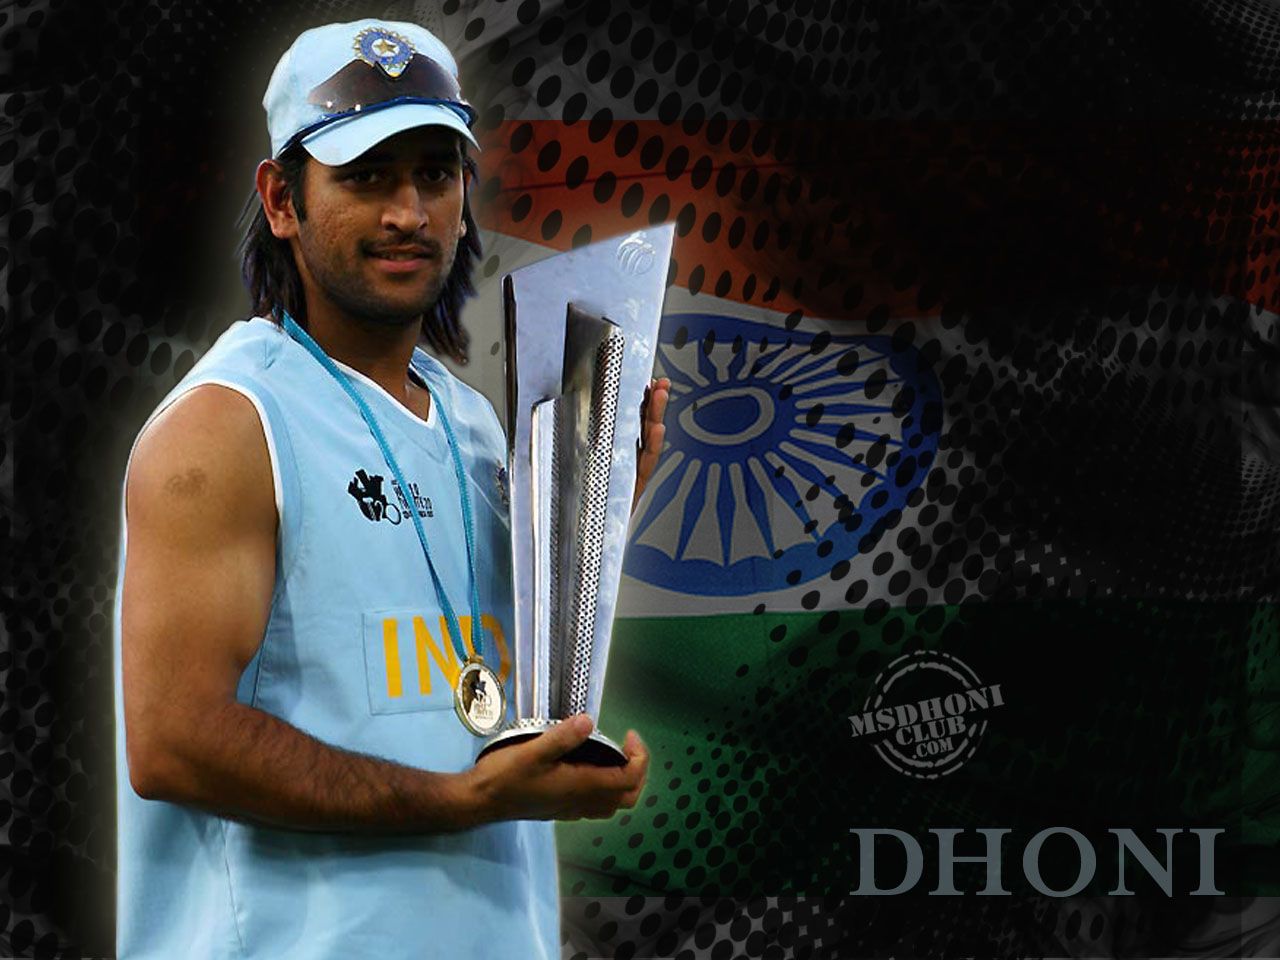 Ms Dhoni Long Hair HD Wallpapers | Free HD Wallpapers for Desktop ...